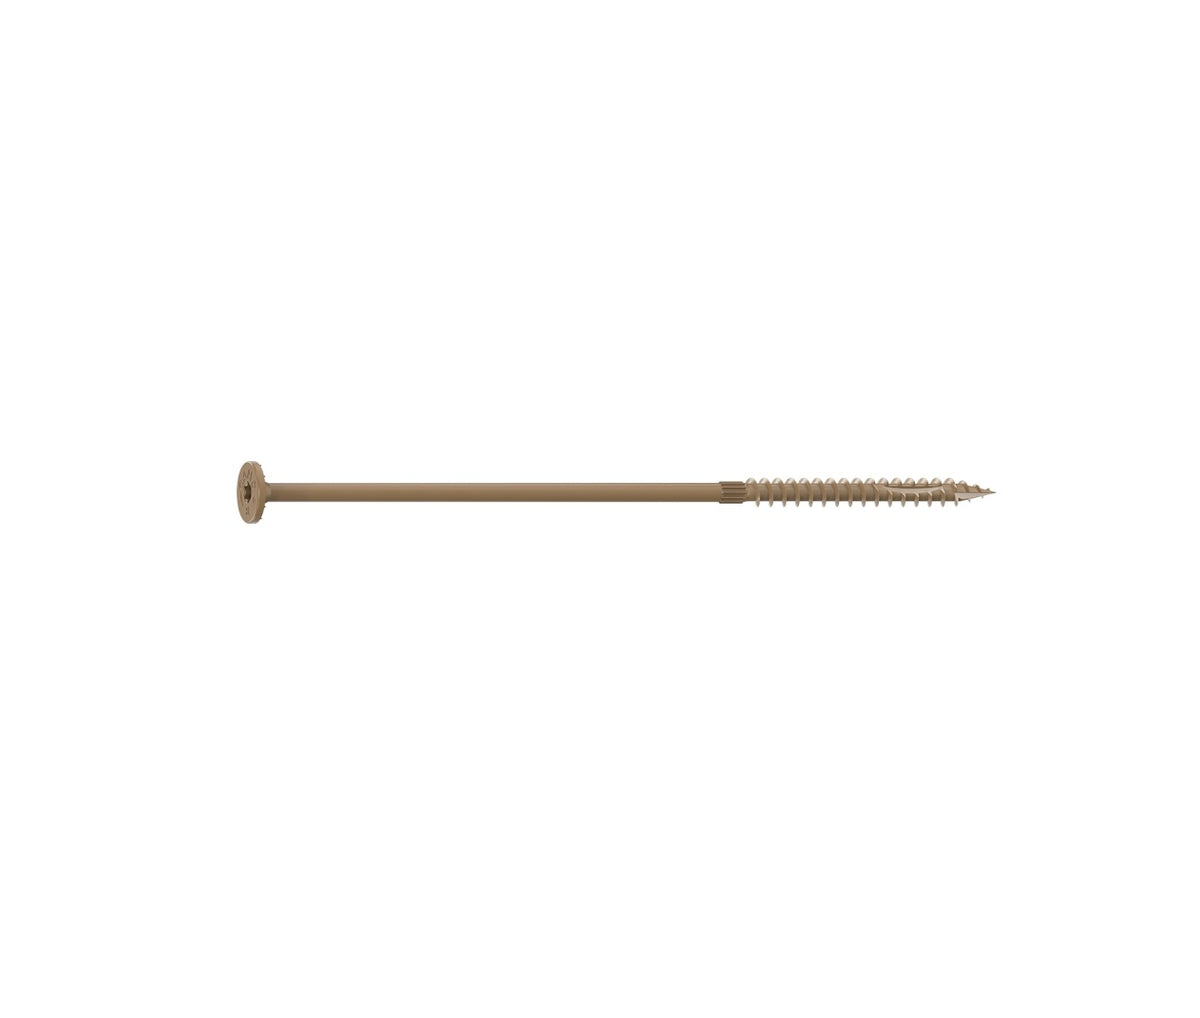 Camo 0360260 Star Drive Flat Head Structural Screw, 1/4 inches x 8 inches